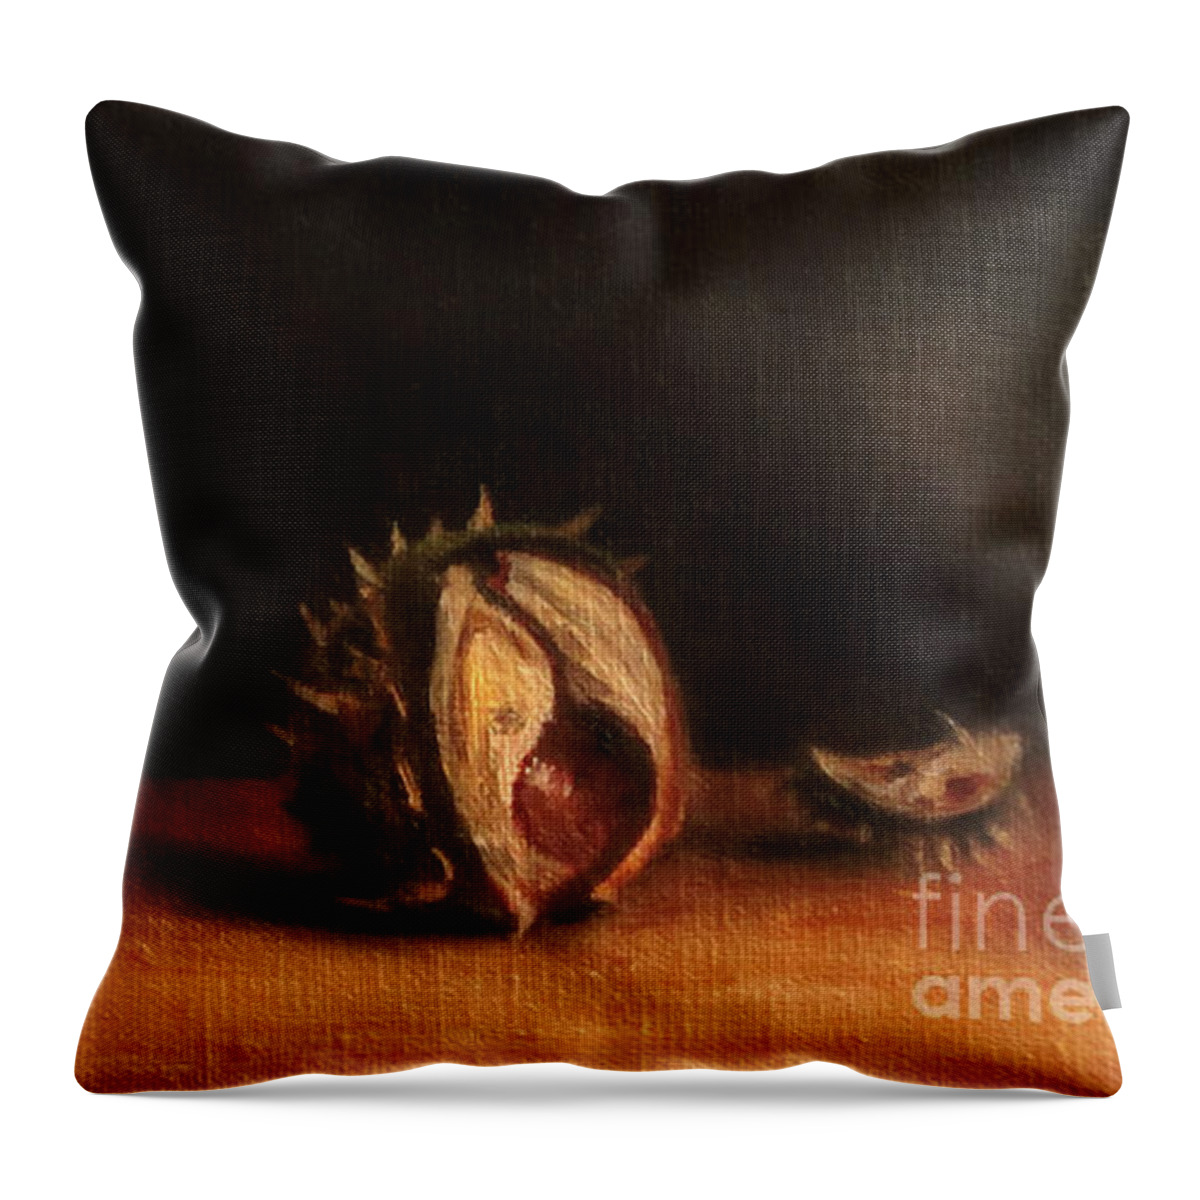 Chestnut Throw Pillow featuring the painting Opening by Ulrike Miesen-Schuermann